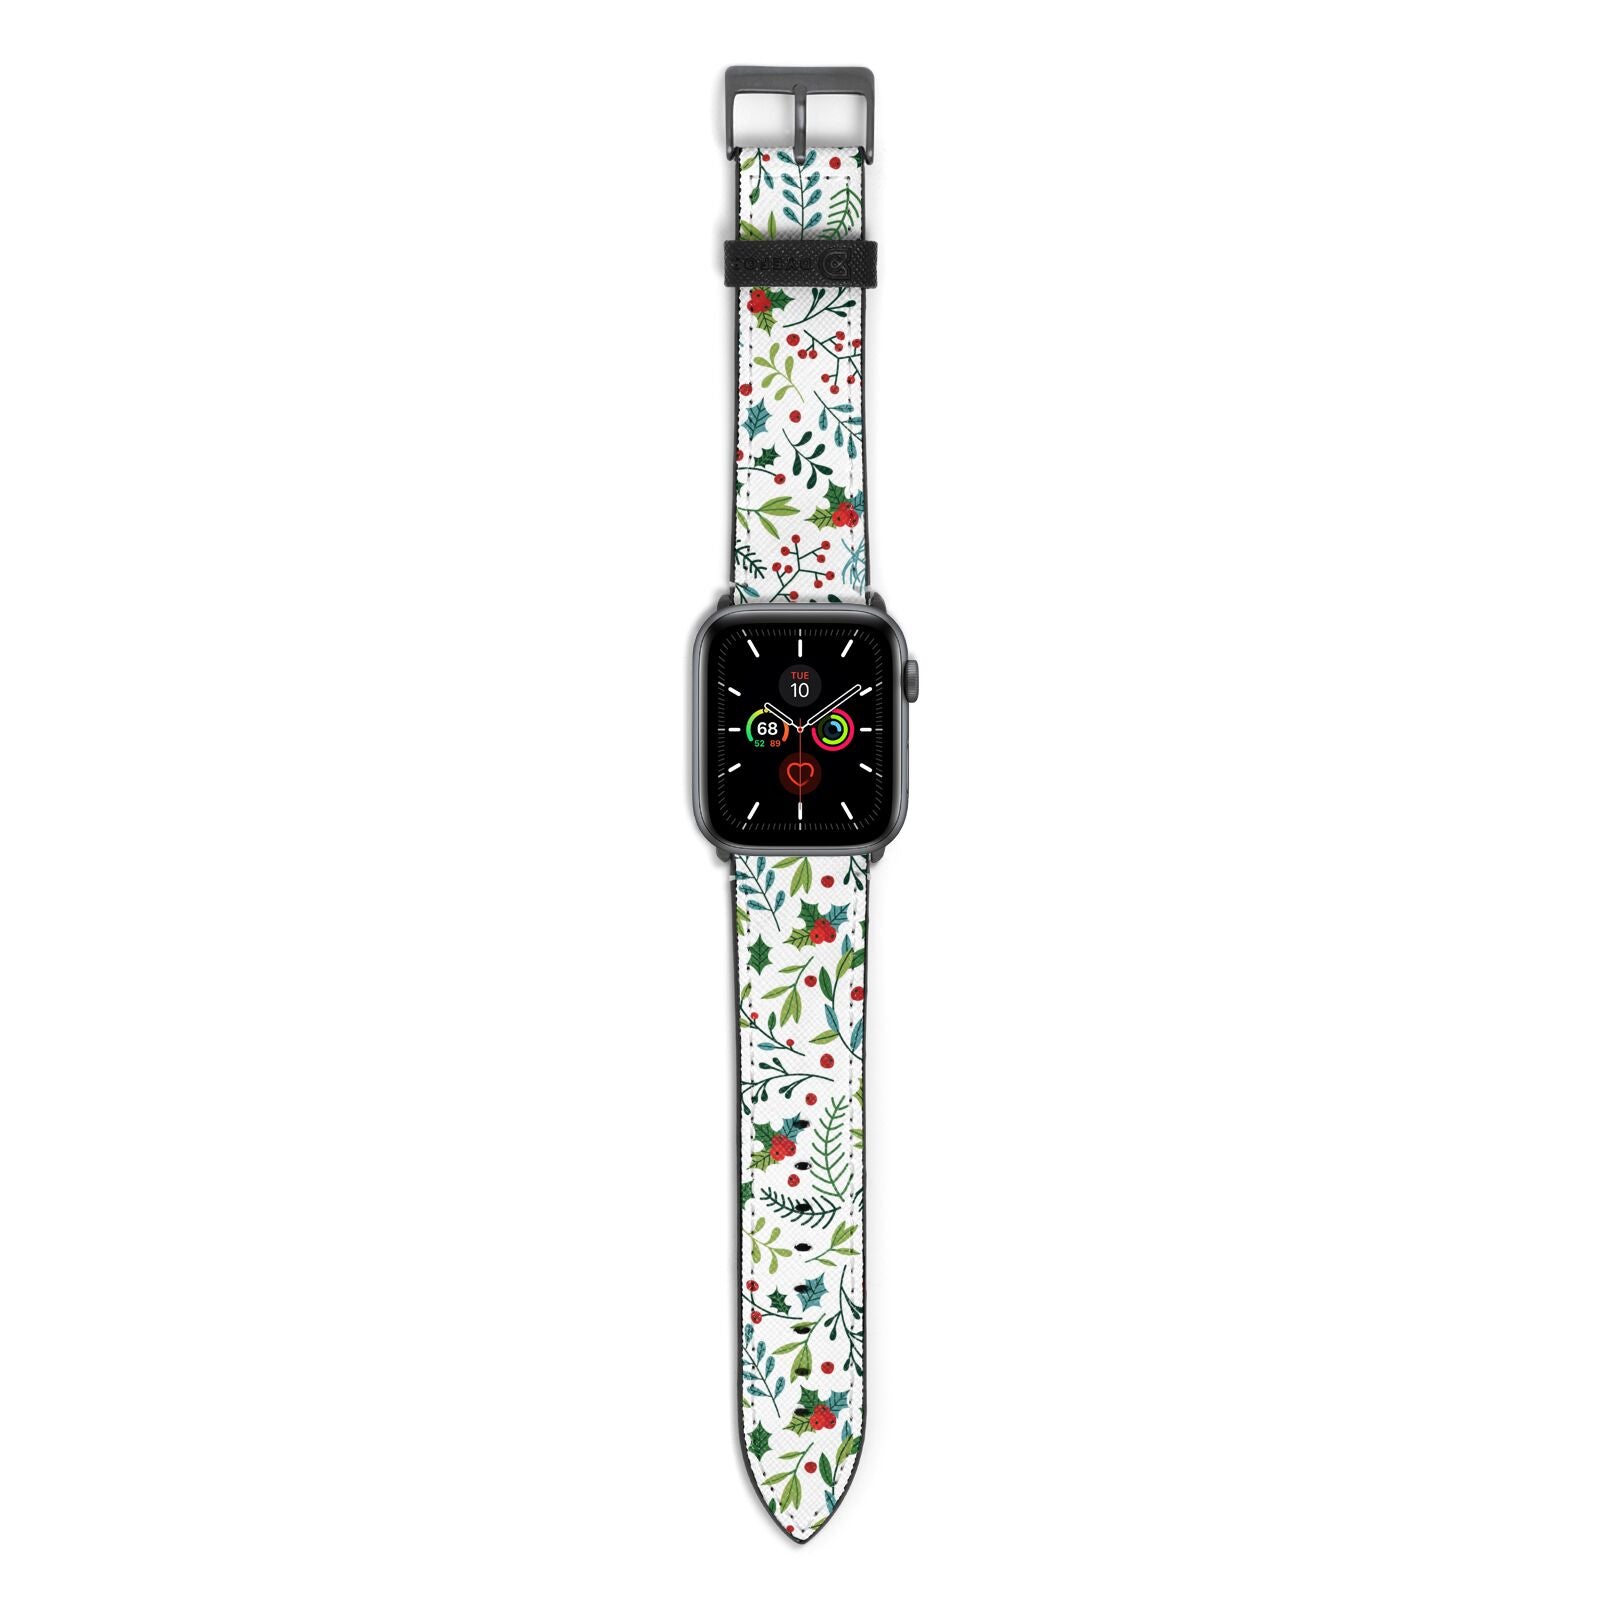 Winter Floral Apple Watch Strap with Space Grey Hardware